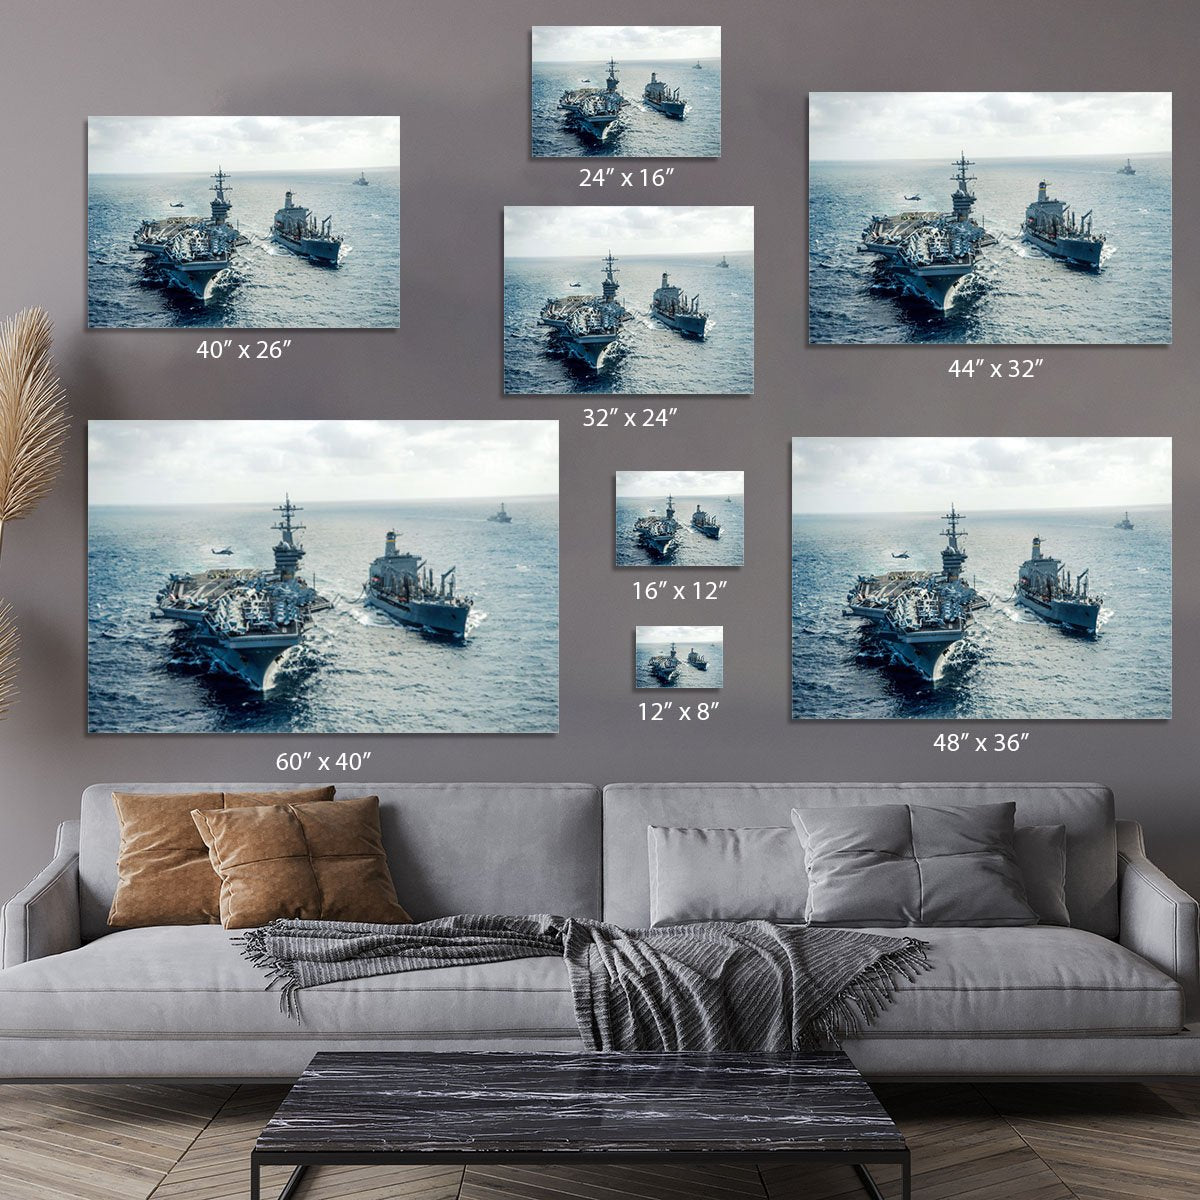 navy crossing the ocean Canvas Print or Poster